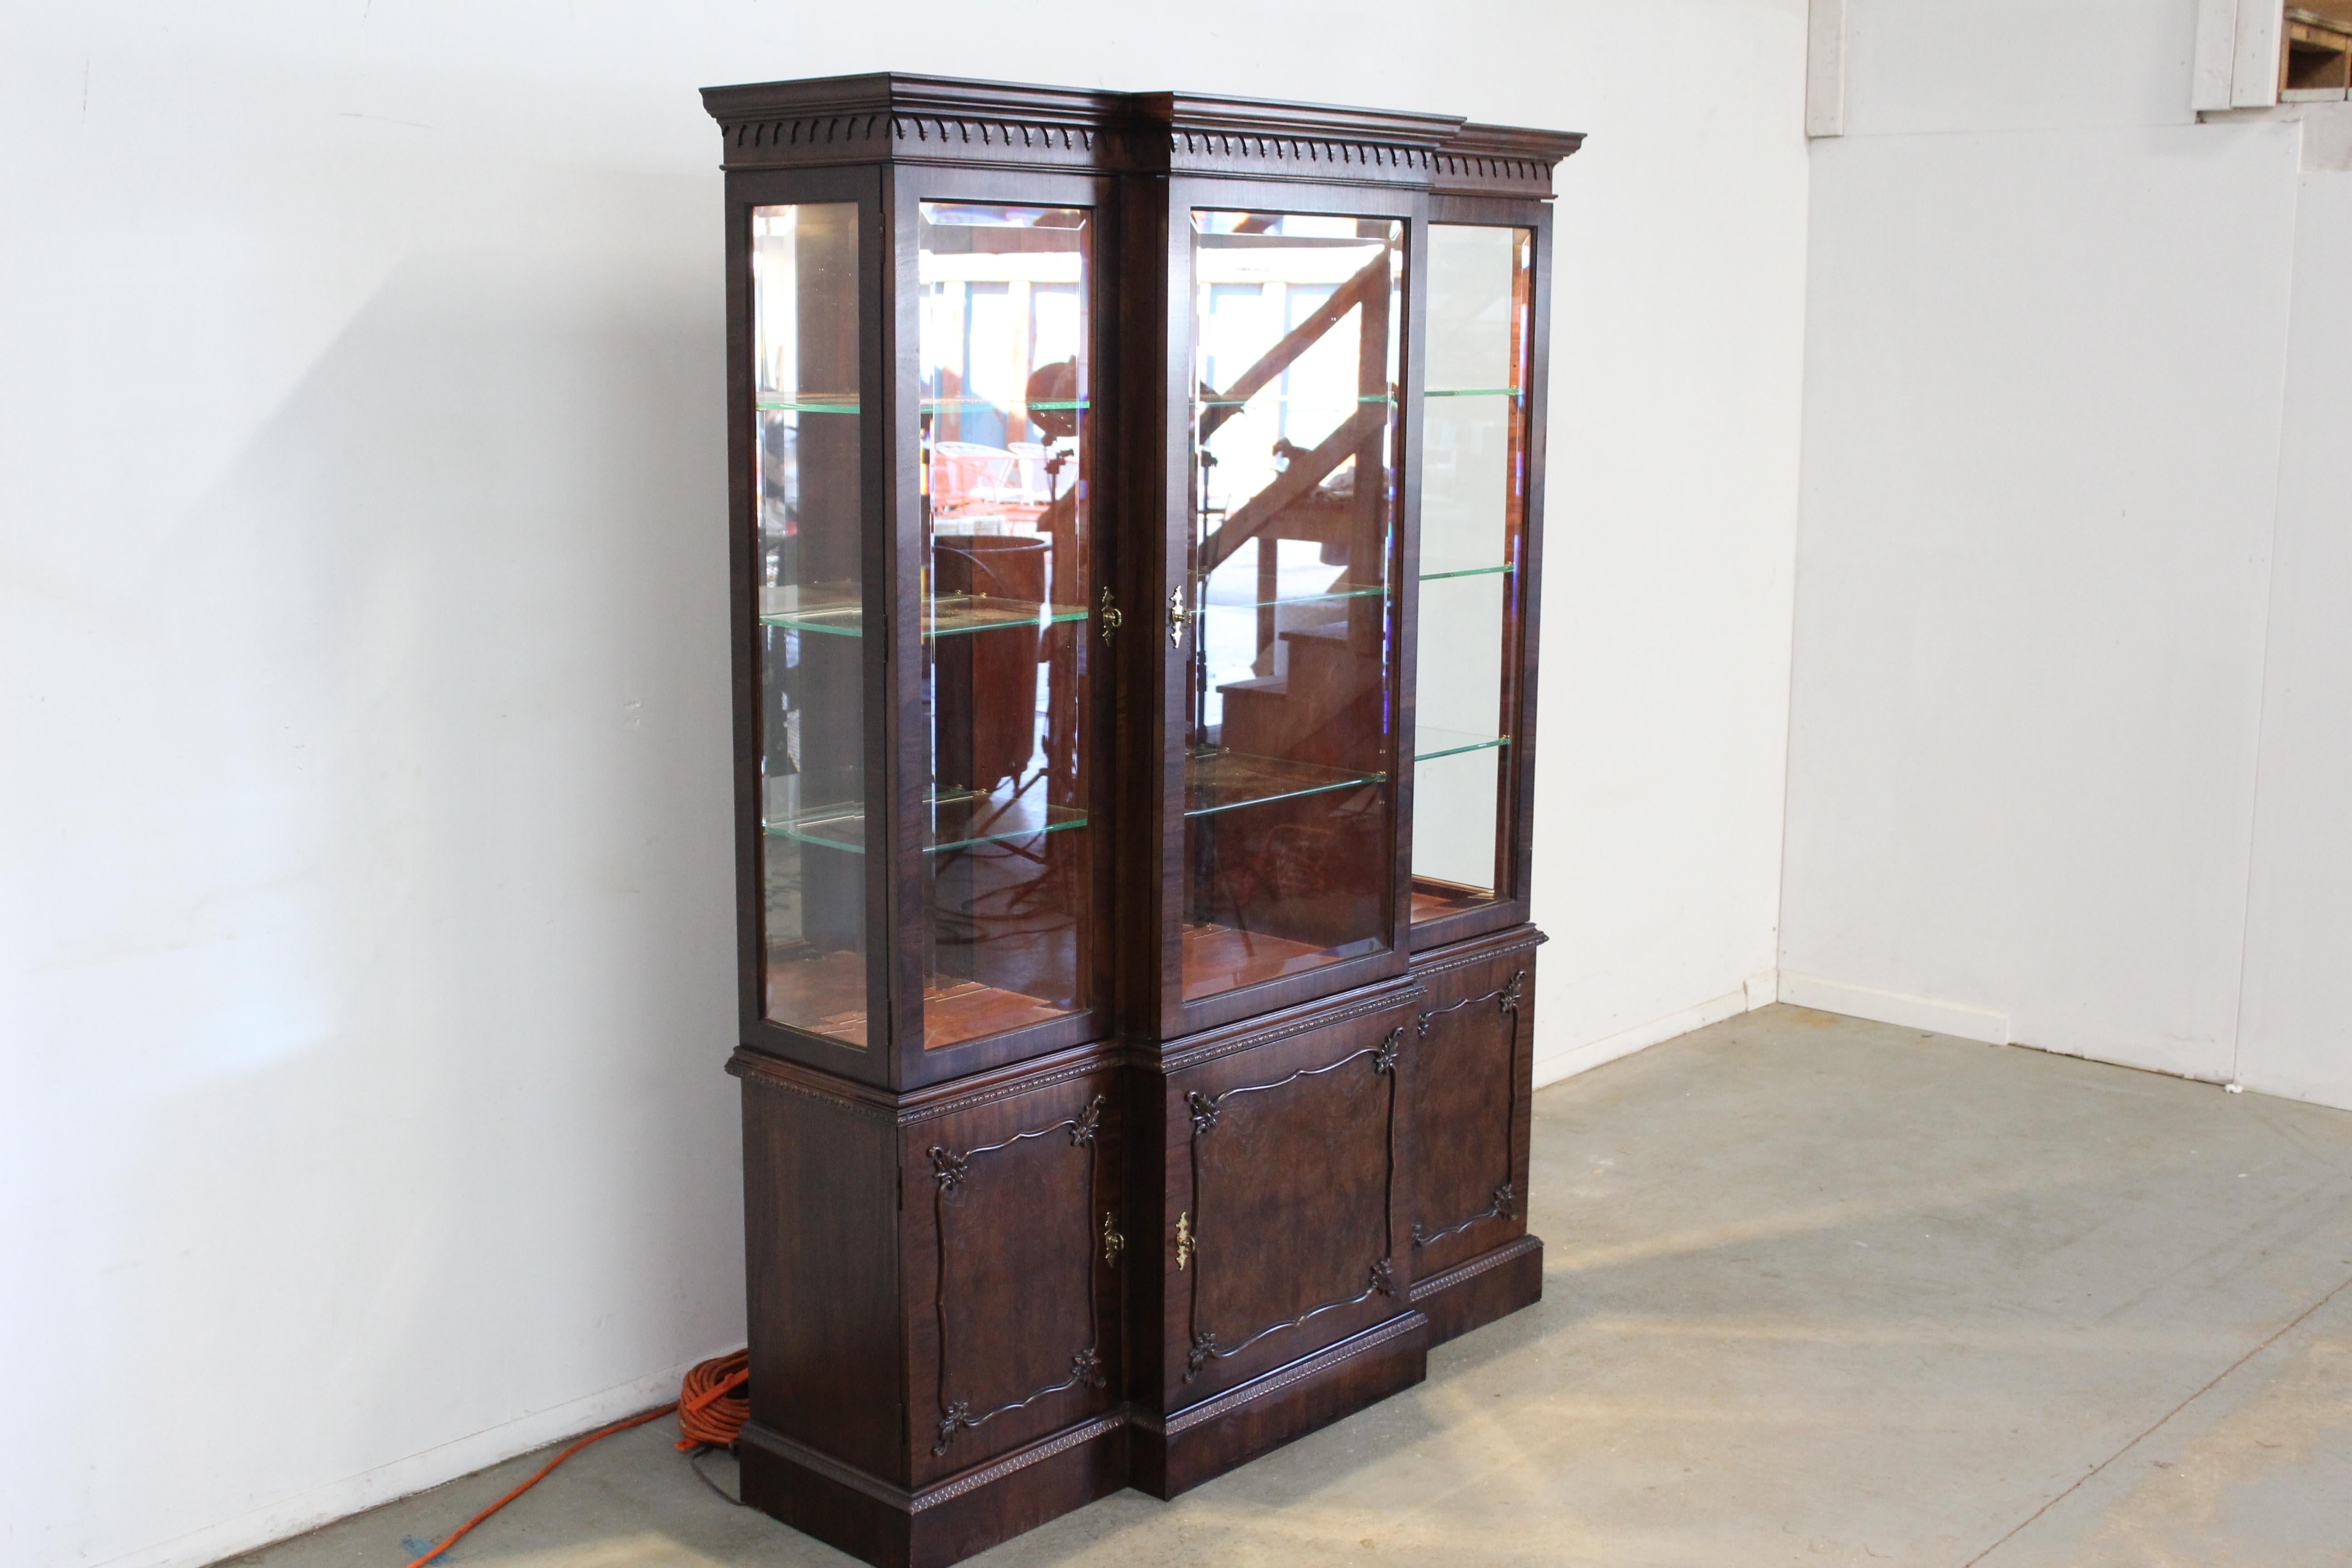 Chippendale Burl Mahogany Breakfront/China Cabinet by Century Furniture

Offered is a Chippendale Burl Mahogany Breakfront/China Cabinet by Century Furniture. It is in good condition with slight age wear. It is structurally sound. Review photos